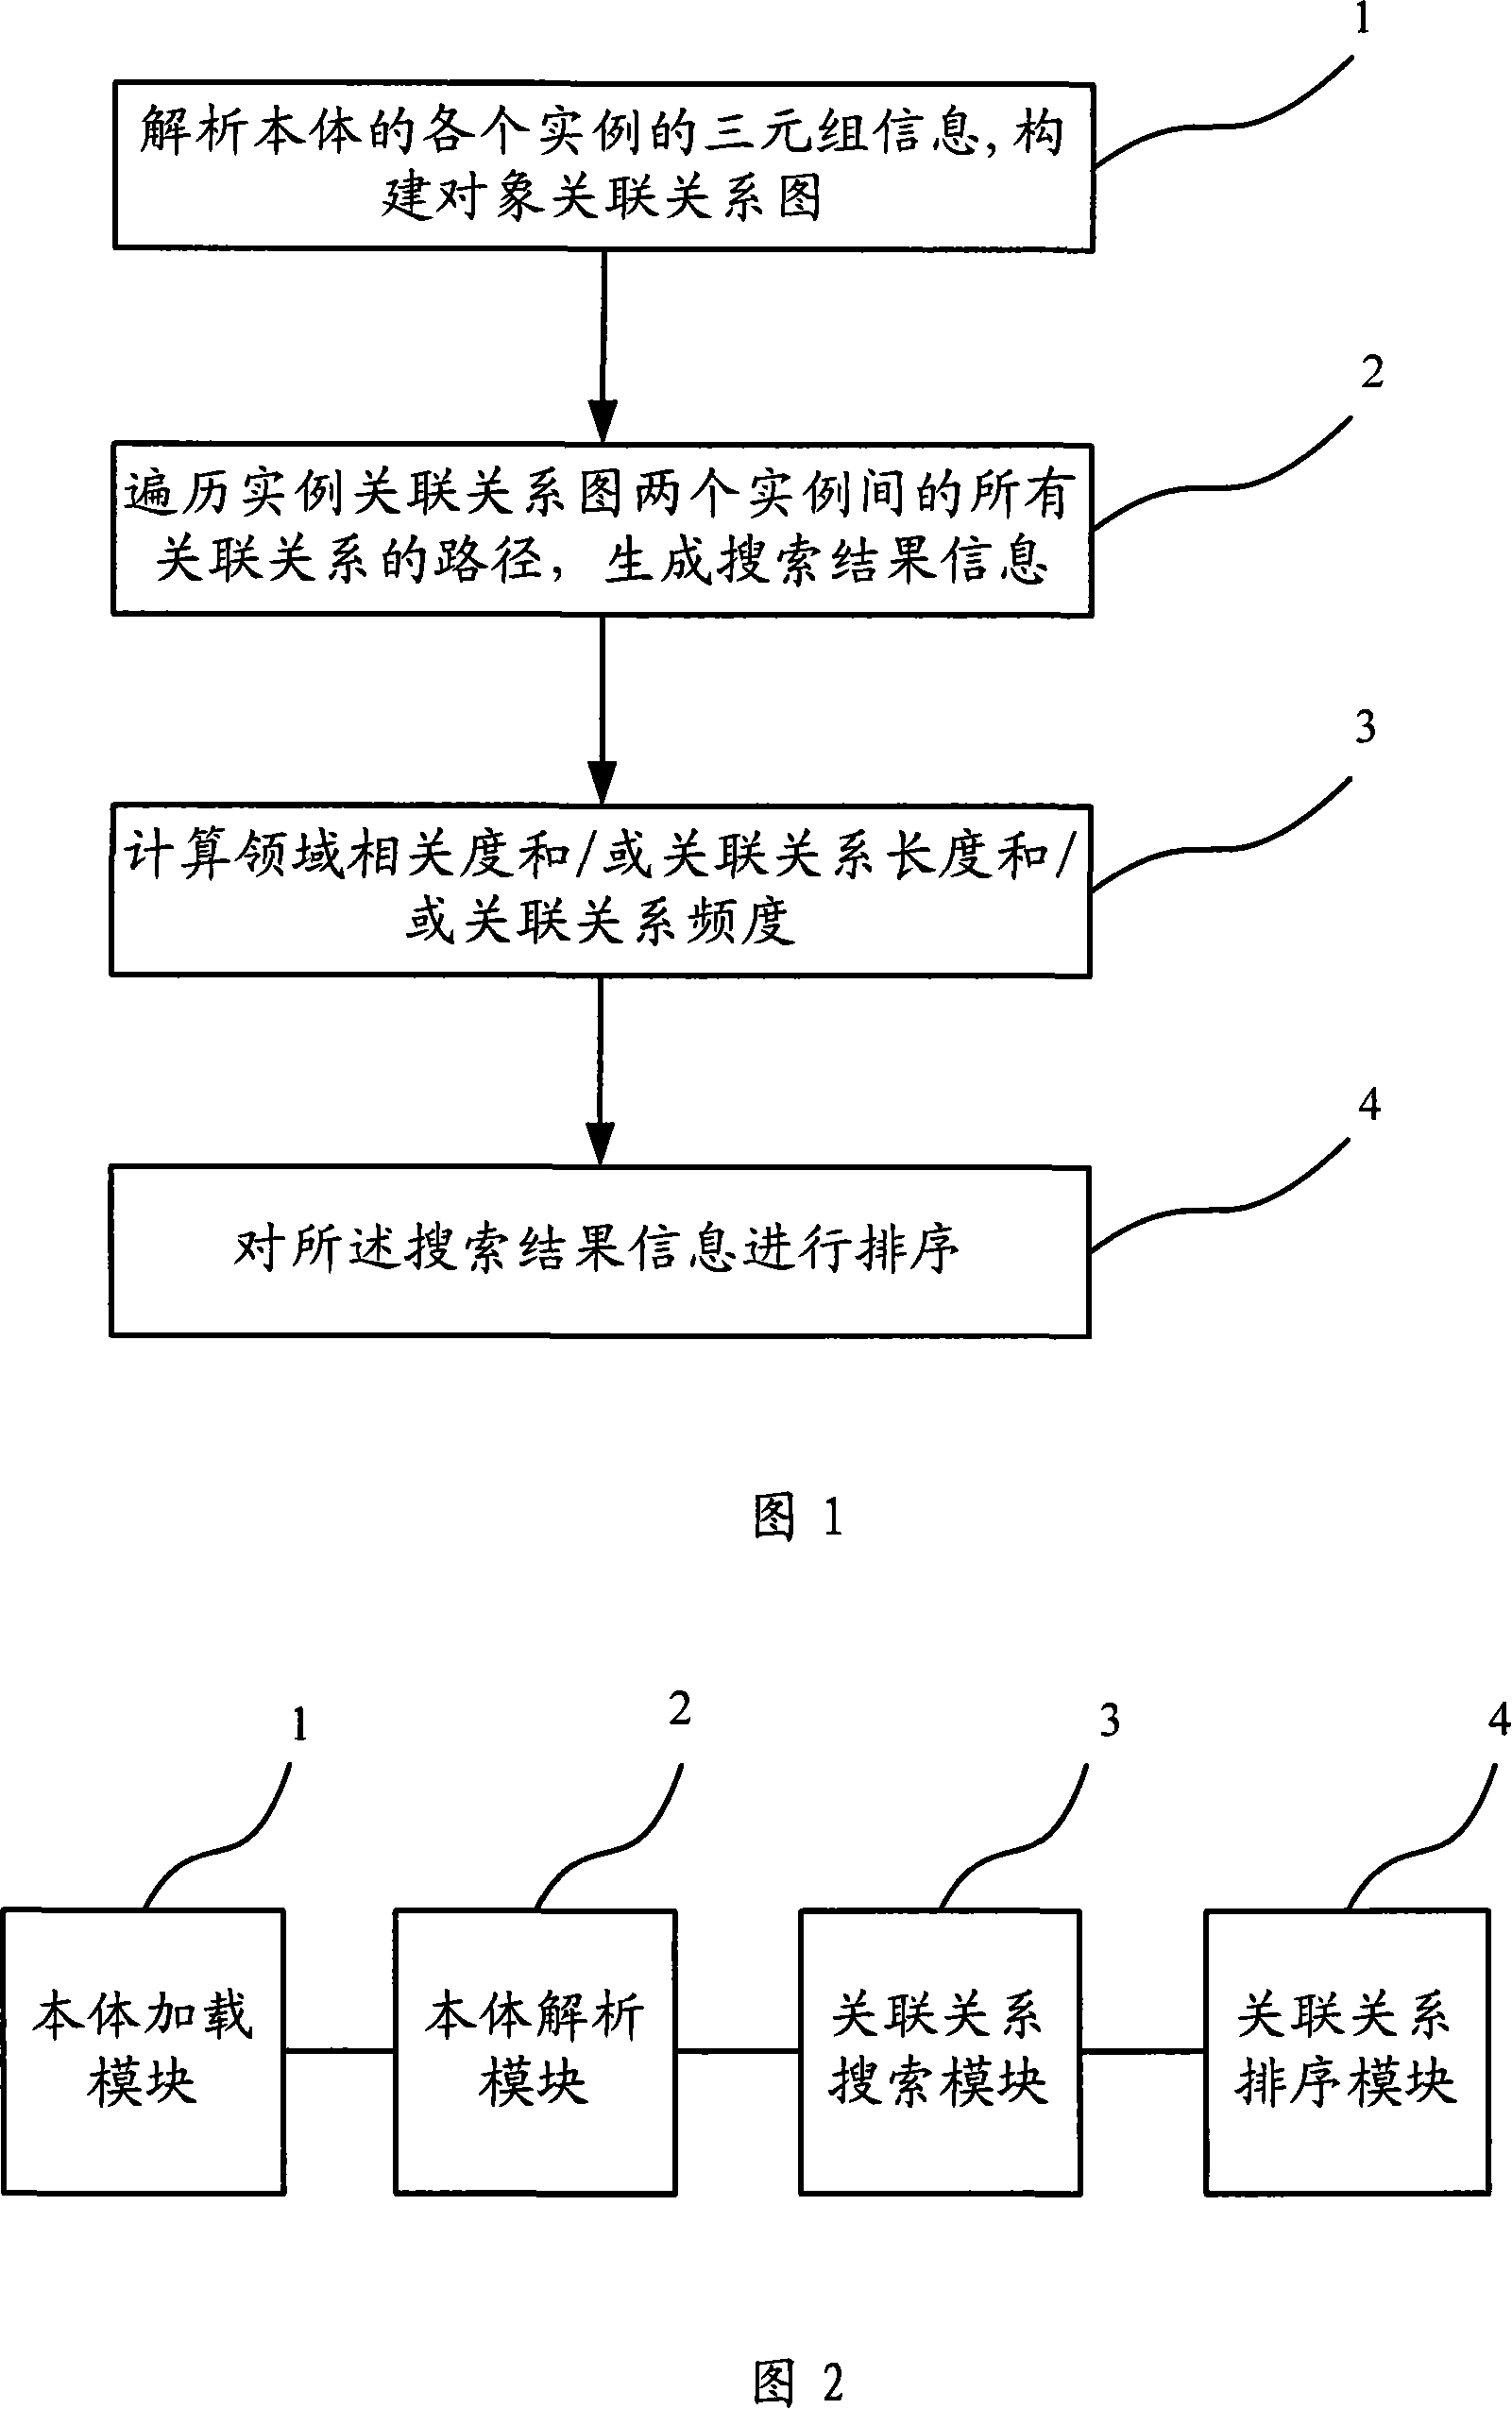 Method and apparatus for ordering incidence relation search result